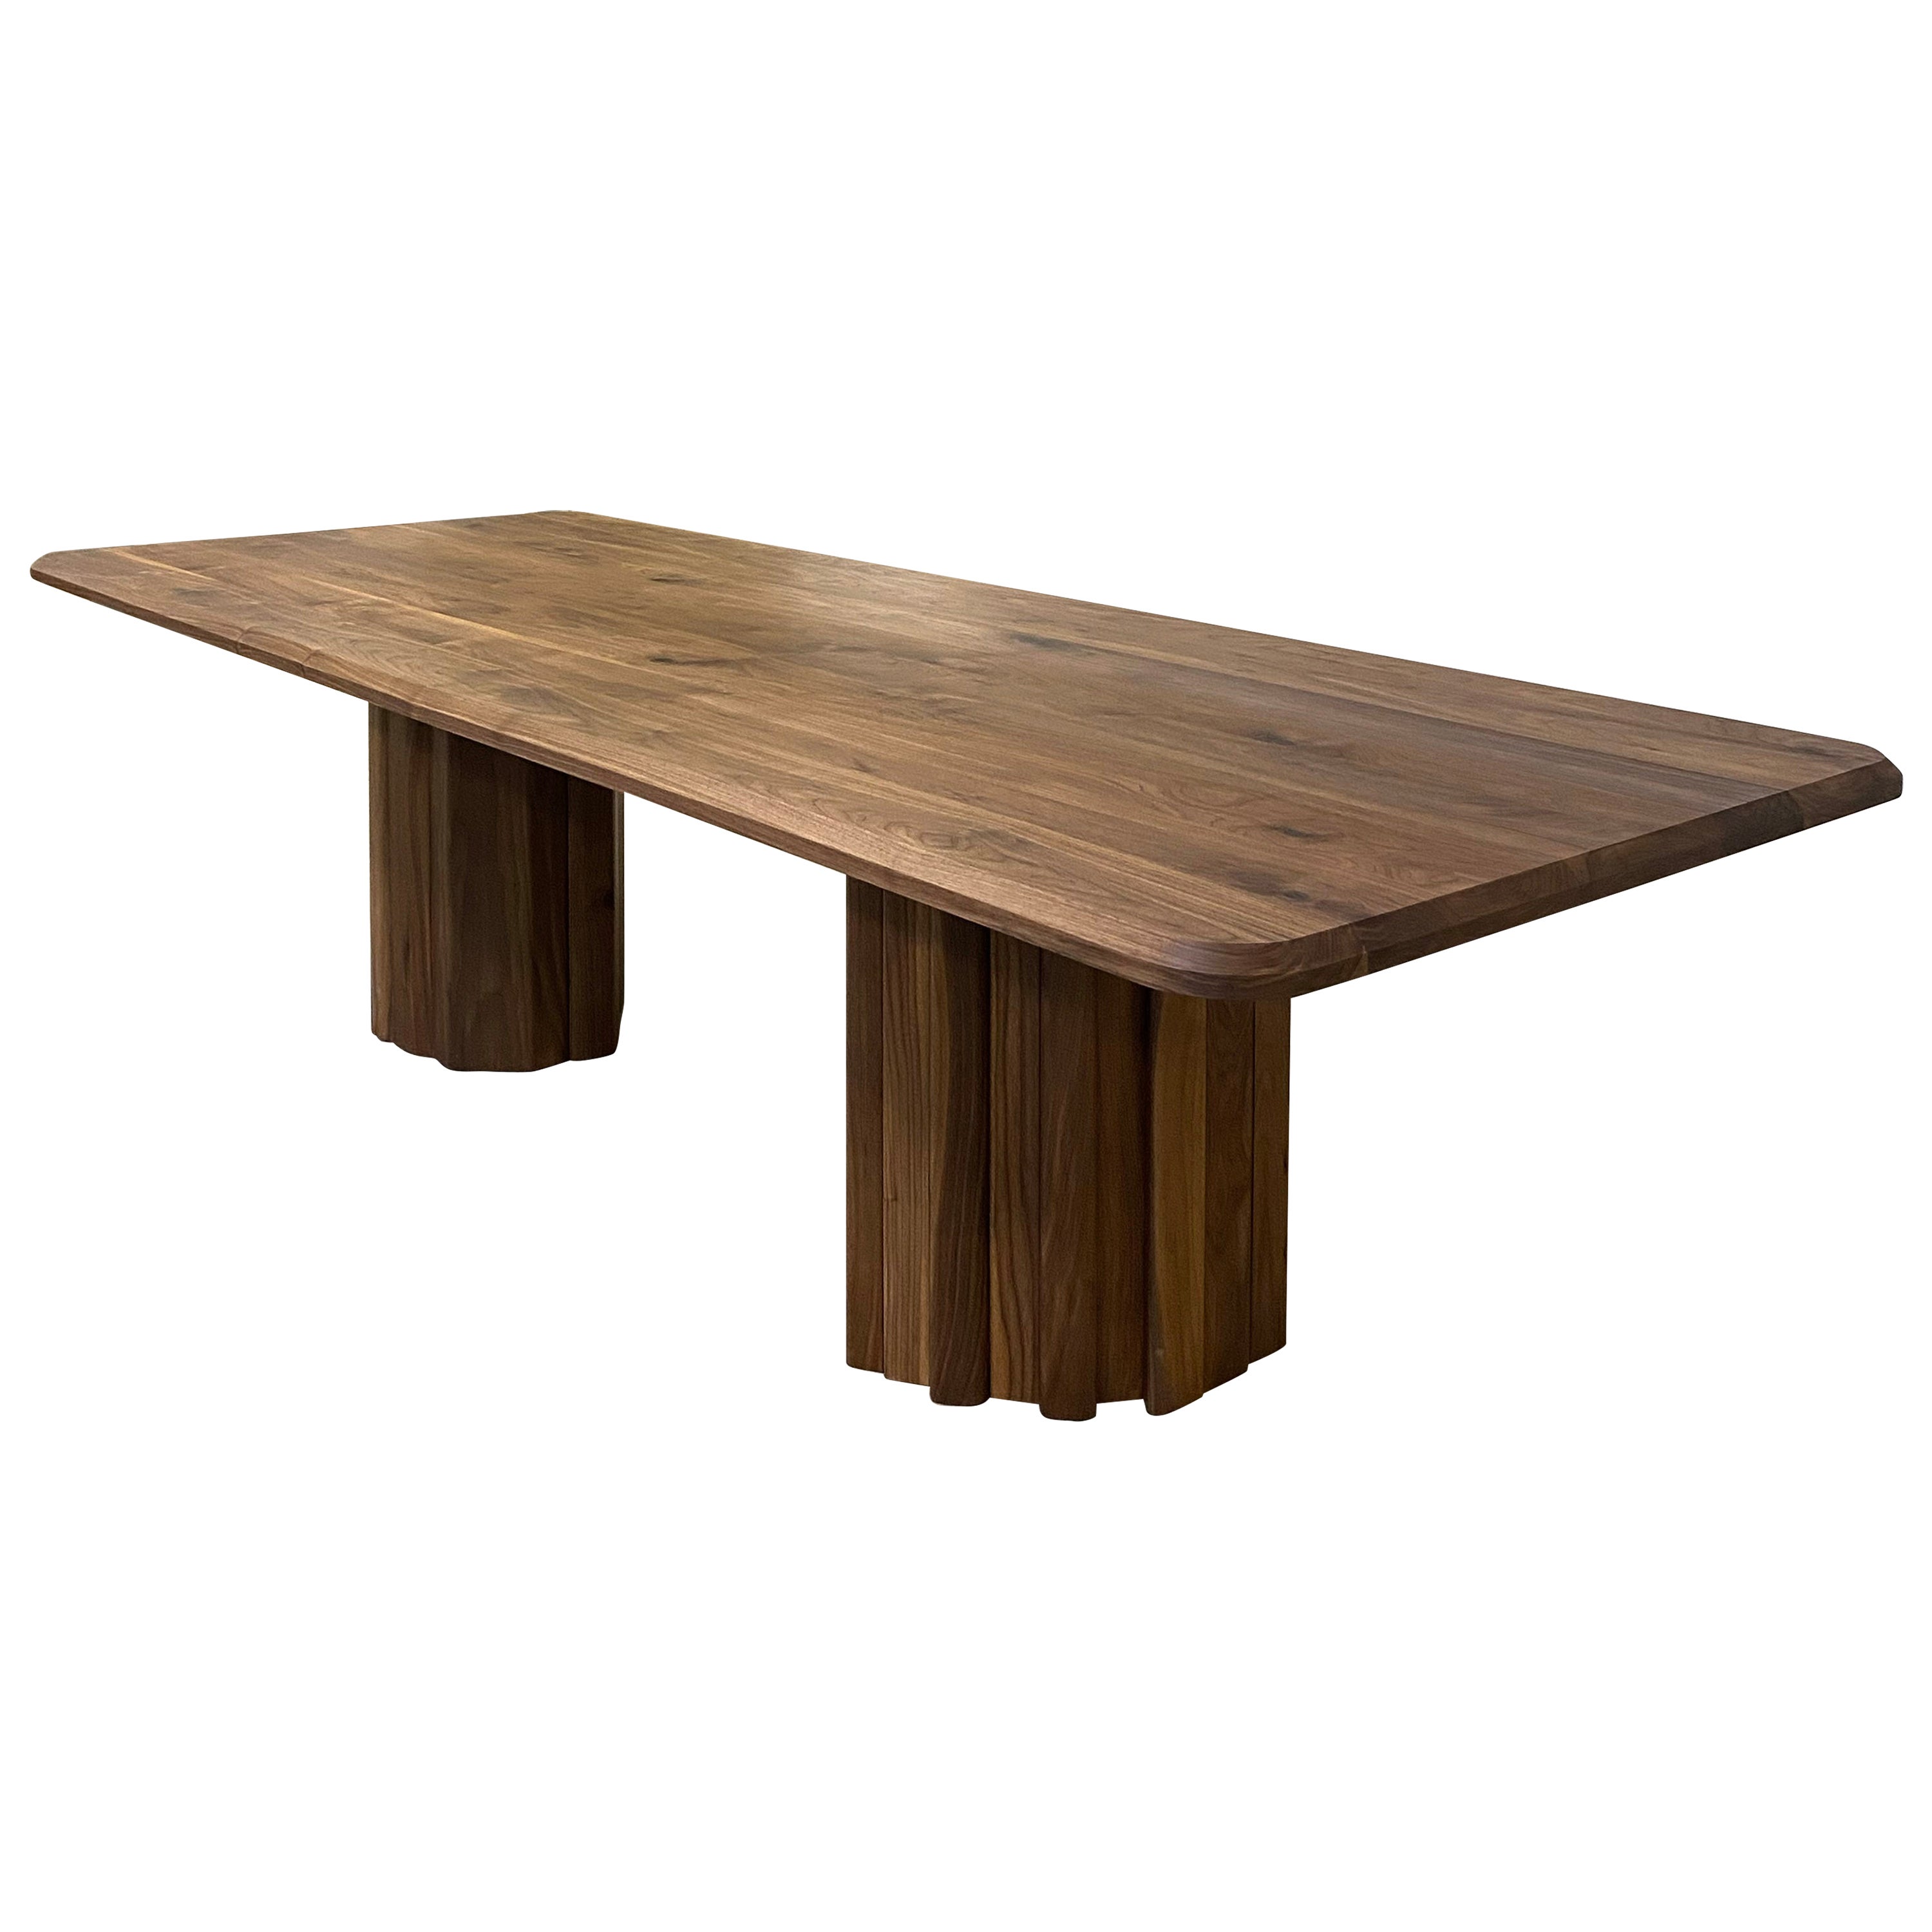 Handcrafted Oiled Walnut Geomorph Dining Table 96"L, Mary Ratcliffe Studio